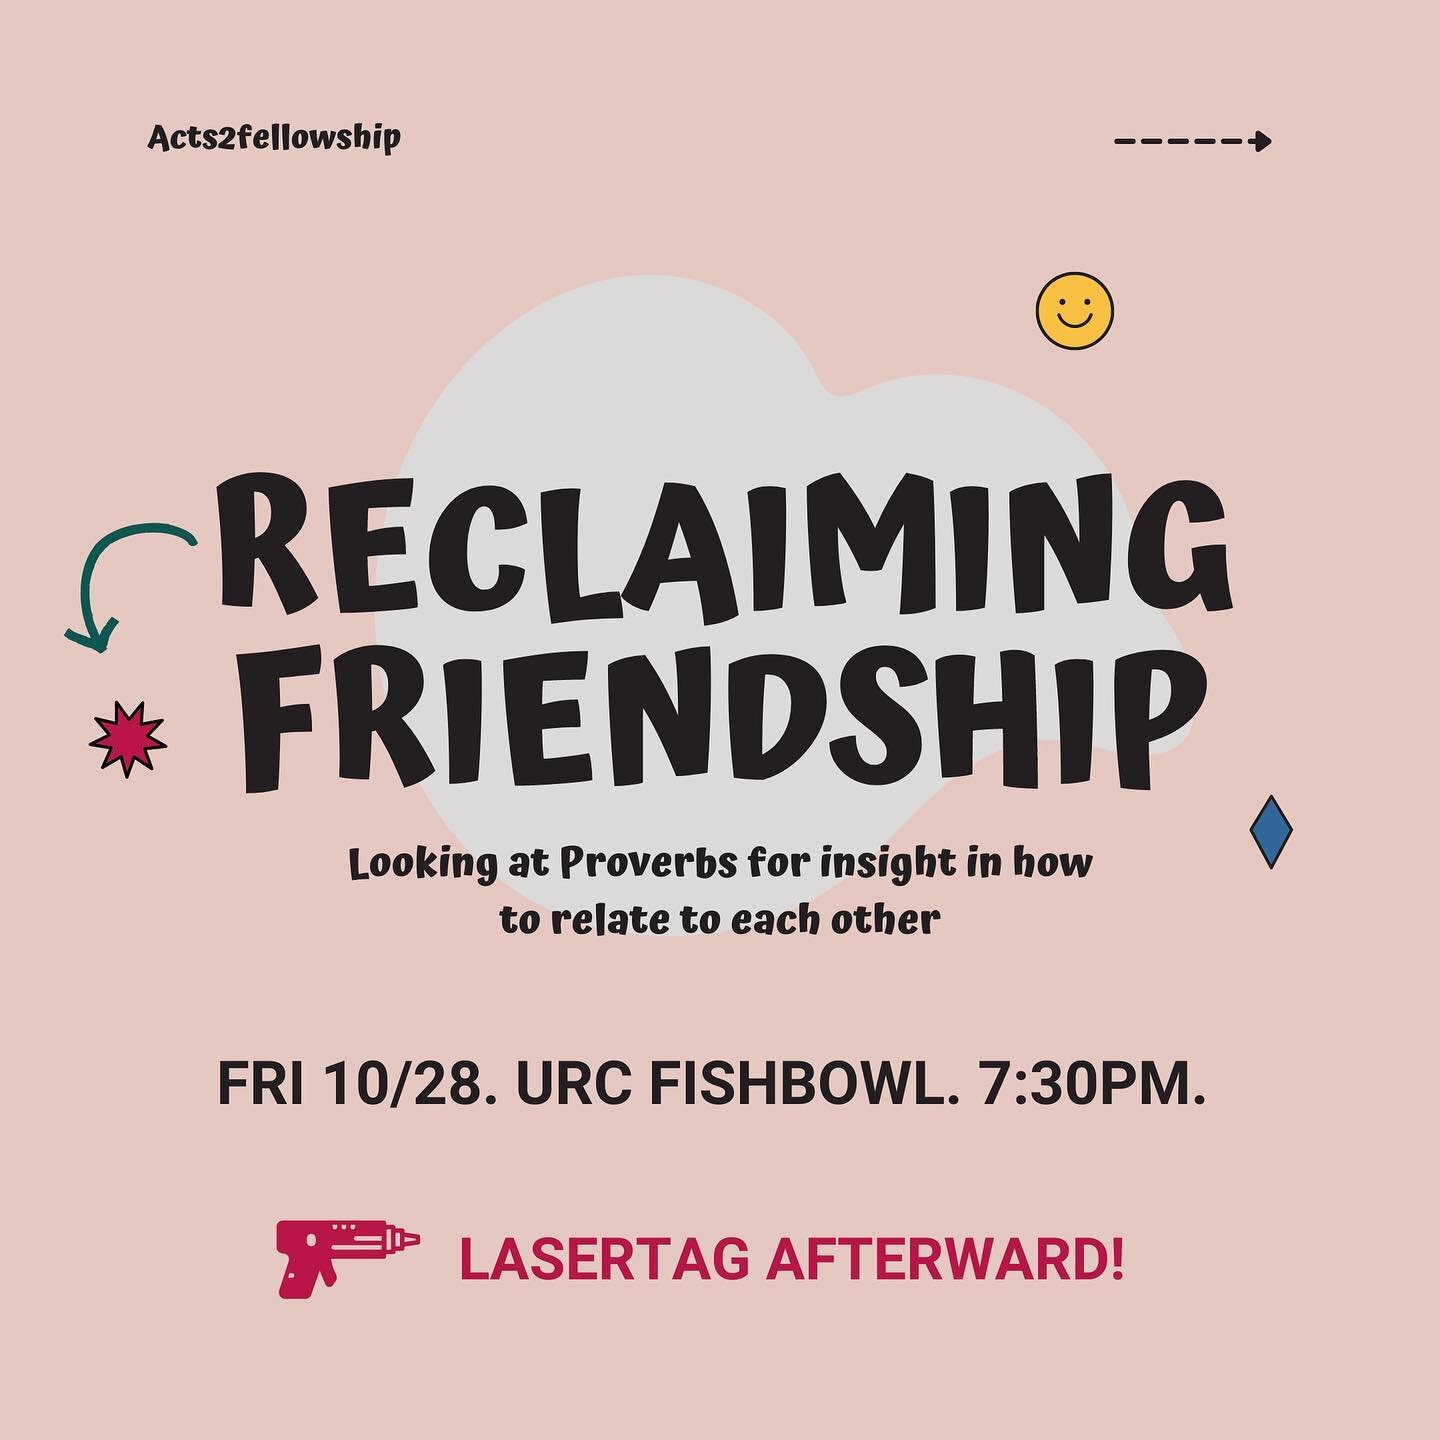 in a world where we&rsquo;re so connected with each other, it can be hard to actually relate. join us for a talk this Friday on how to relate to each other in a frenzied world 🤔

we&rsquo;ll kick it off with dinner @ 6:30 pm at the URC patio, the ta